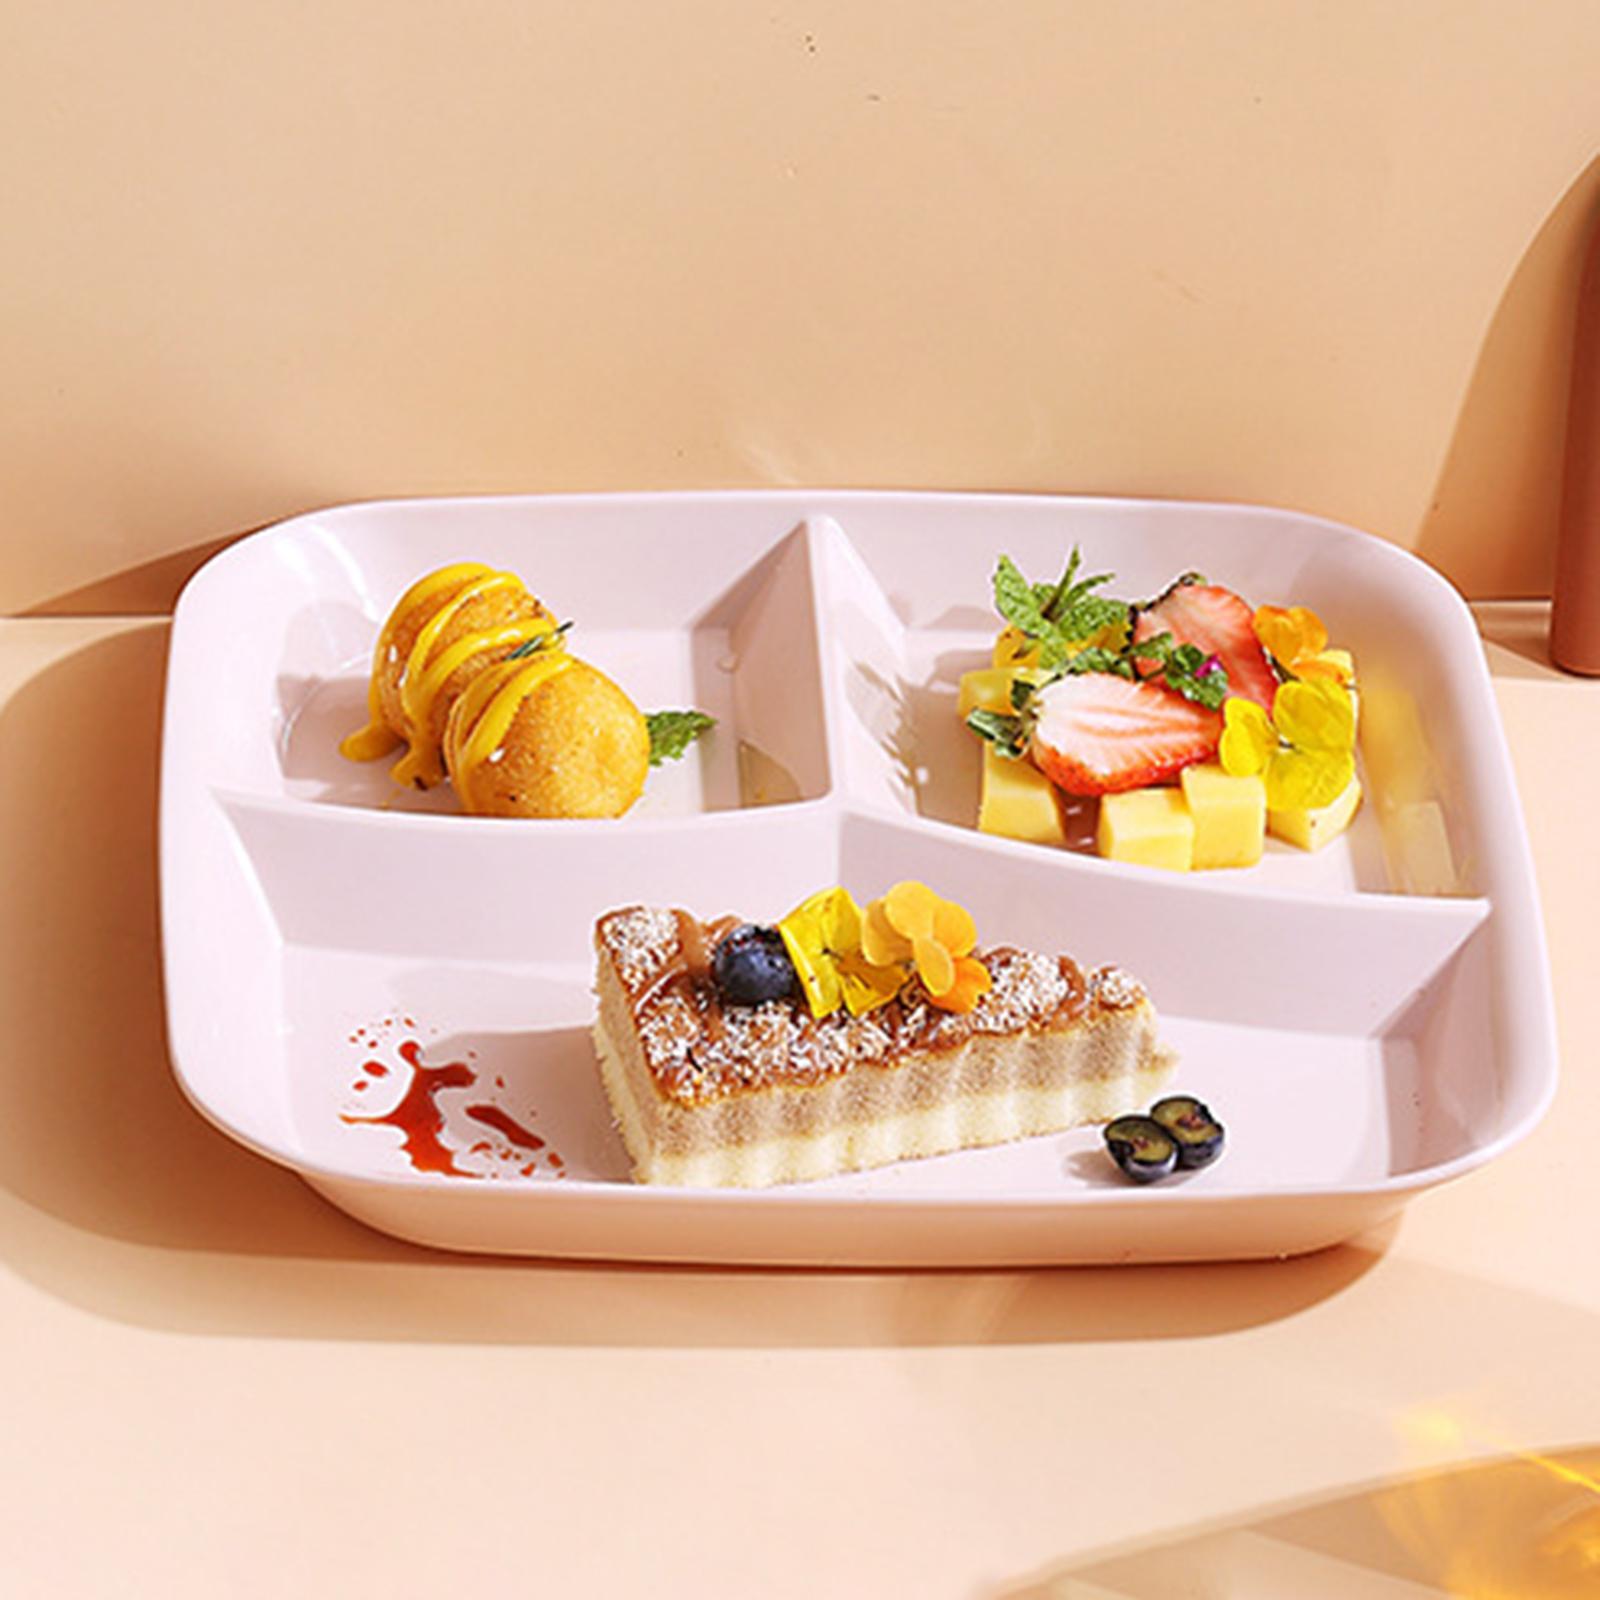 2 Pieces 3-Compartment Food Dishes Plates Tray for Restaurant Kitchen